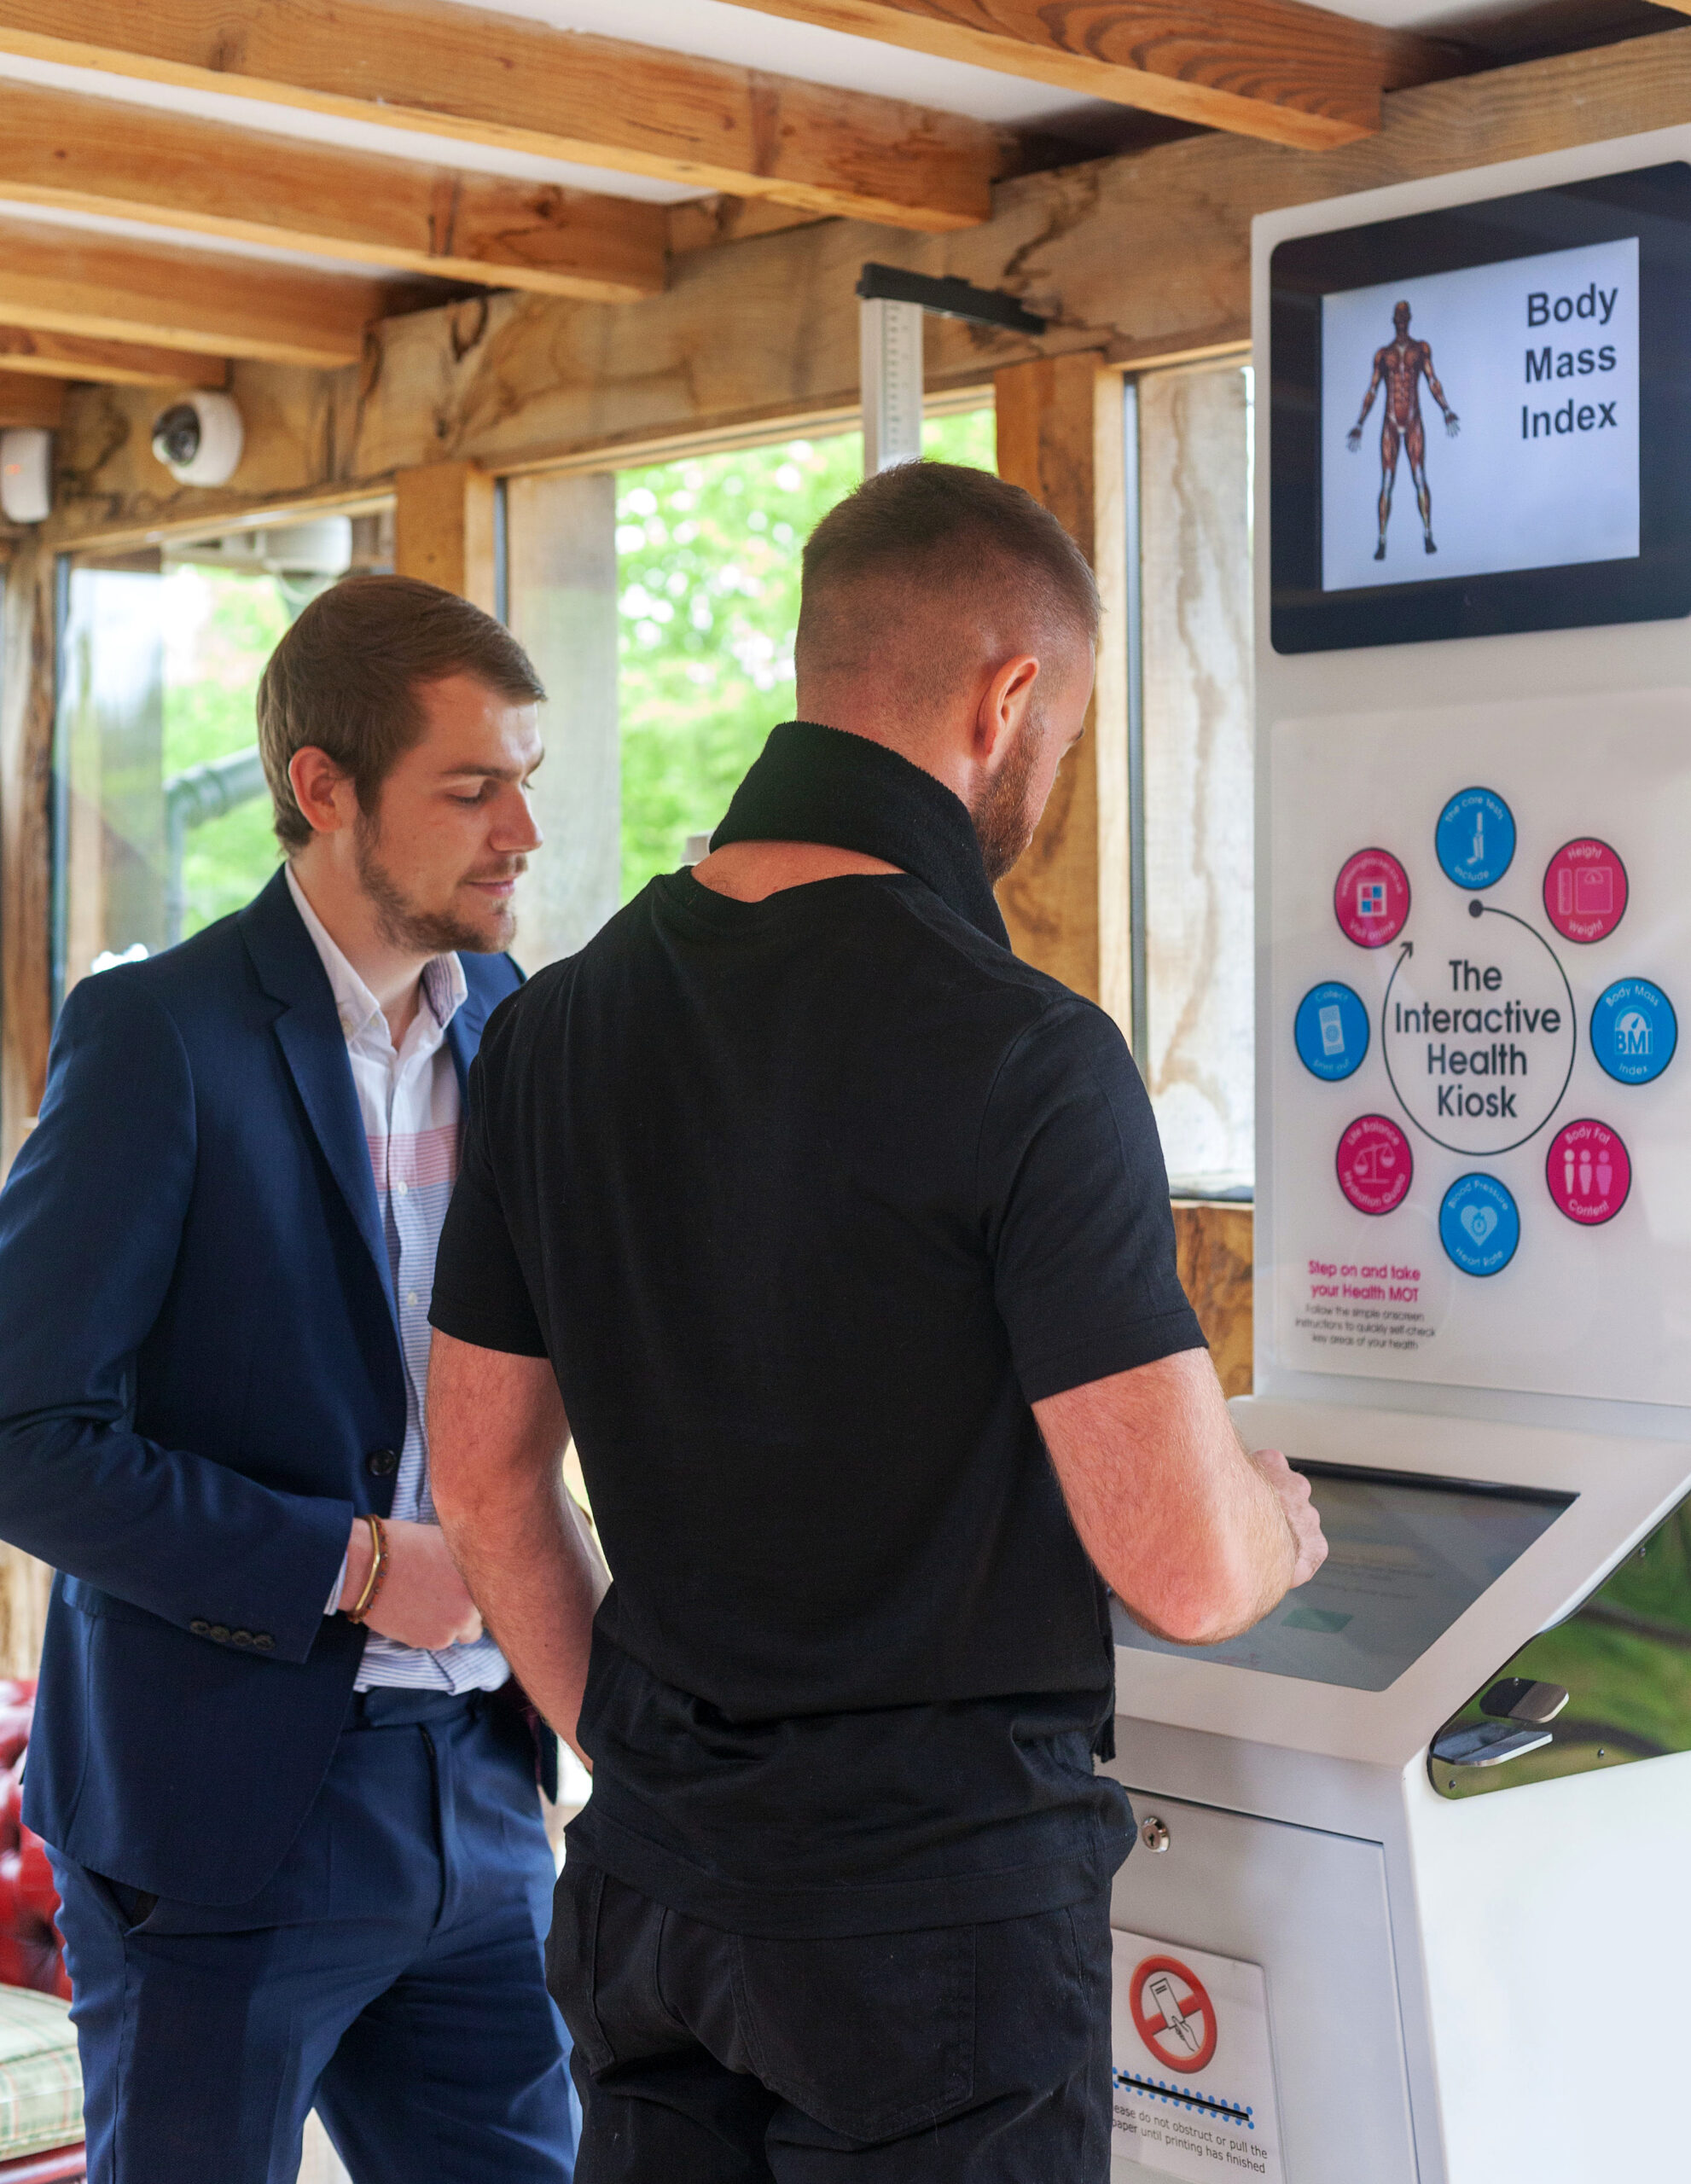 Employee engagement with the Interactive Health Kiosk